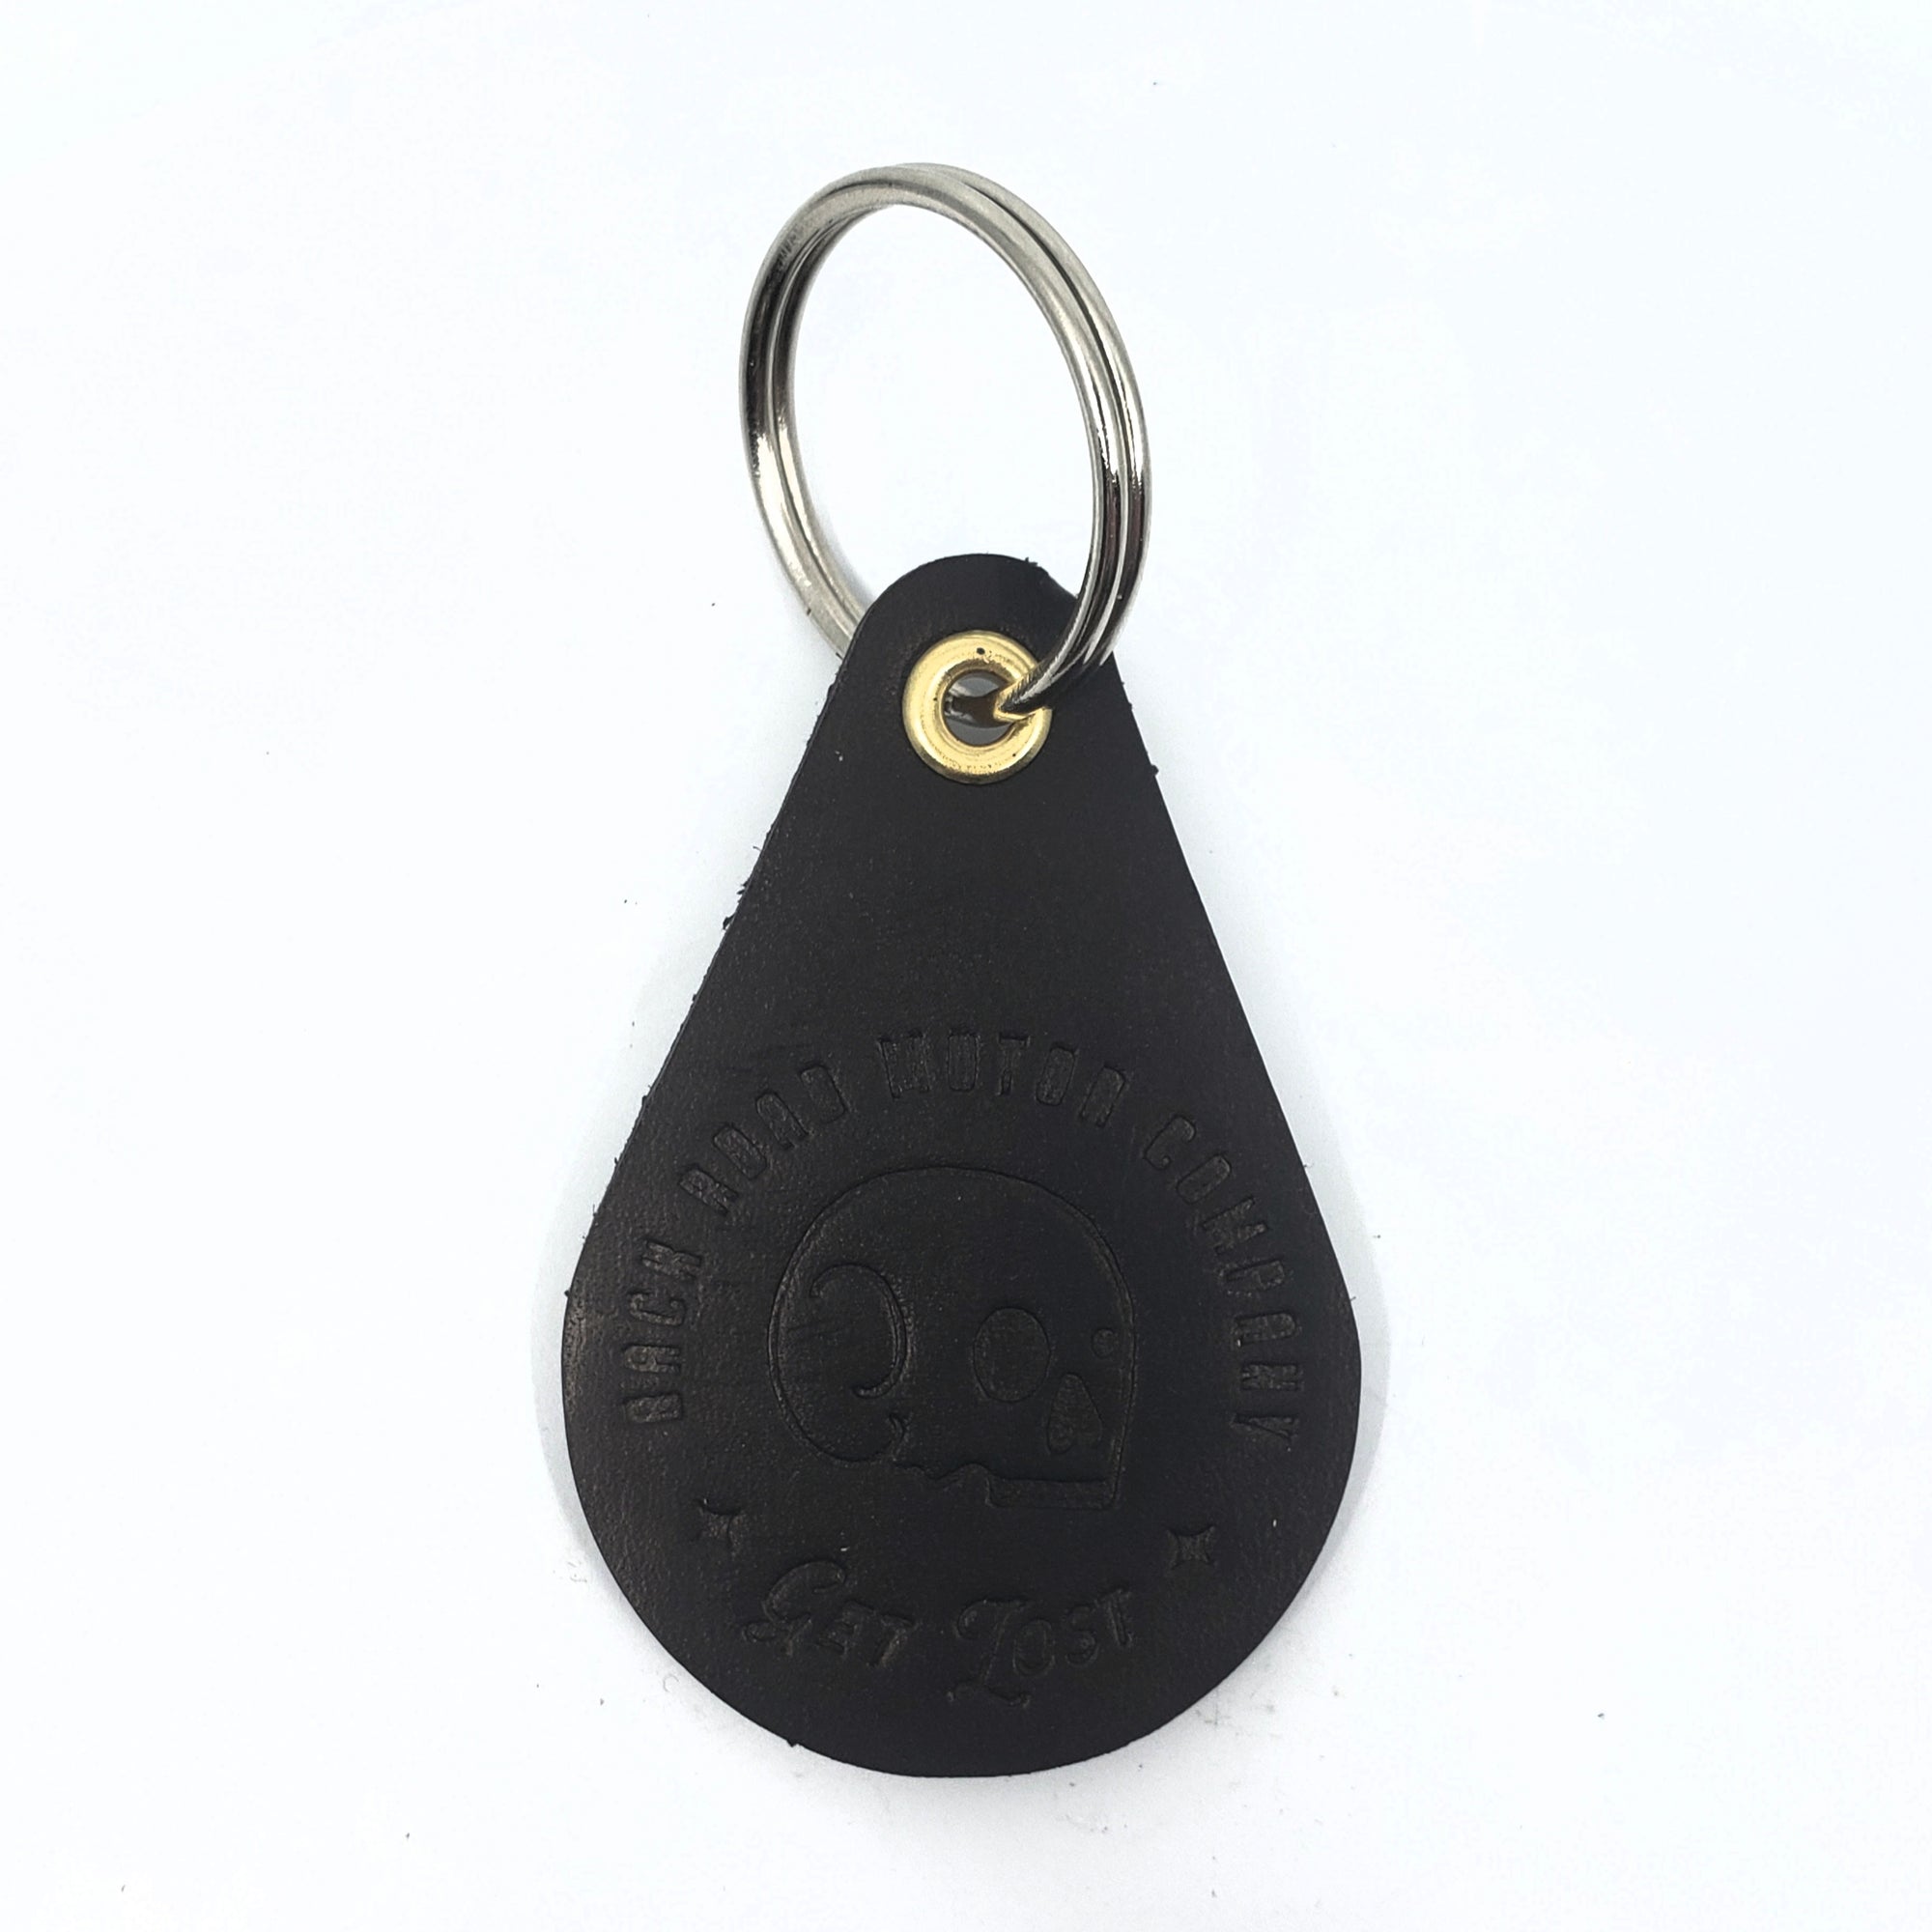 BRMCo Handmade Leather Keychains - Drops